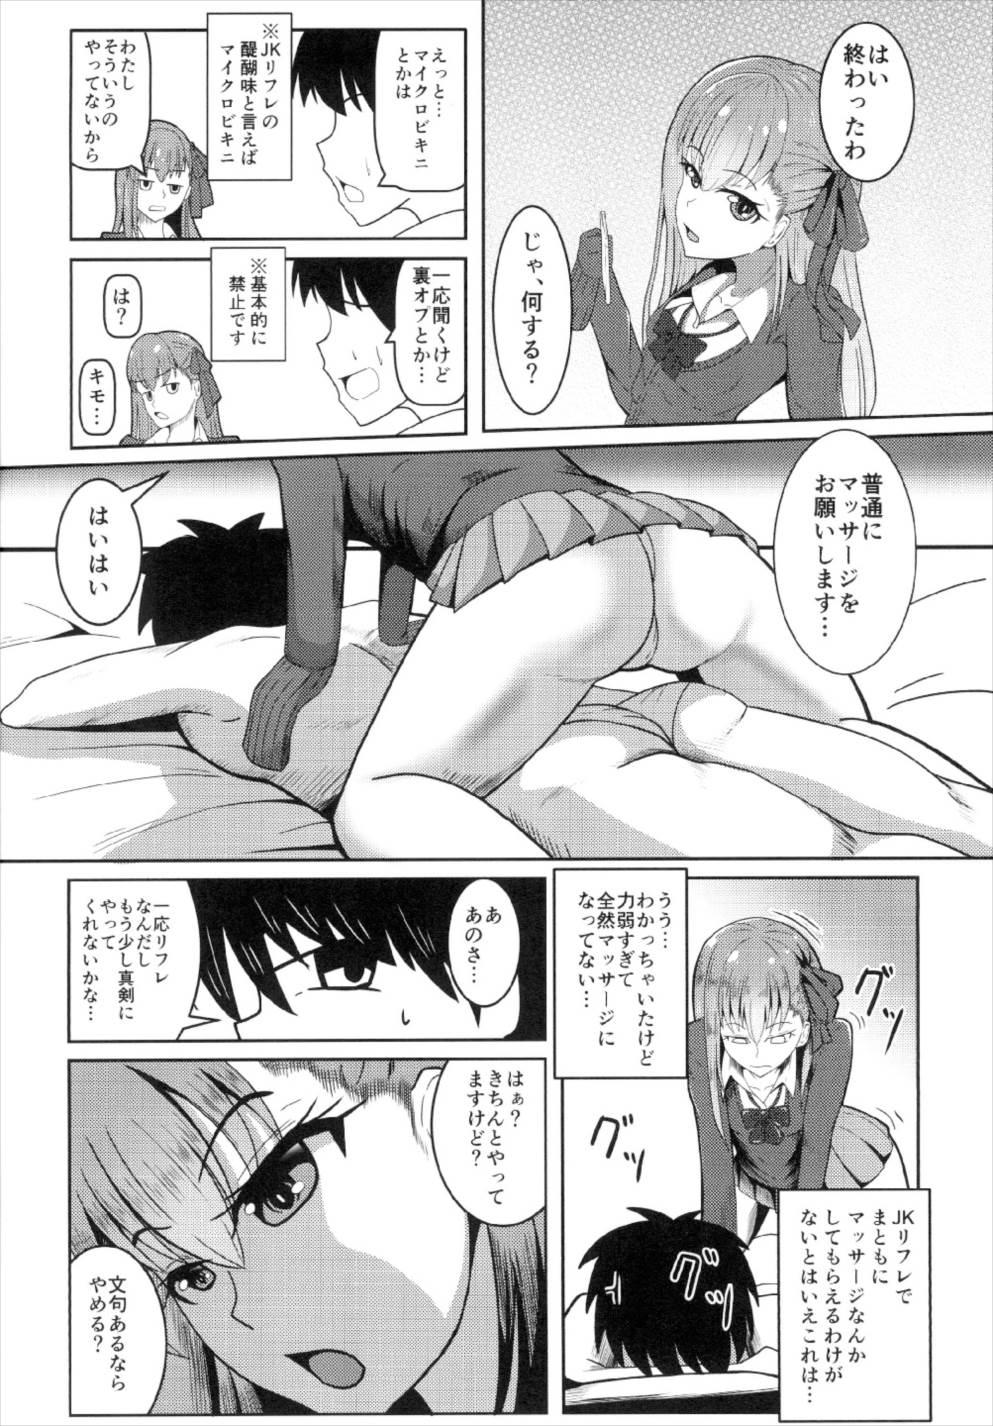 Throat Fuck Chaldea JK Collection Vol. 2 Meltlilith - Fate grand order Teen - Page 4